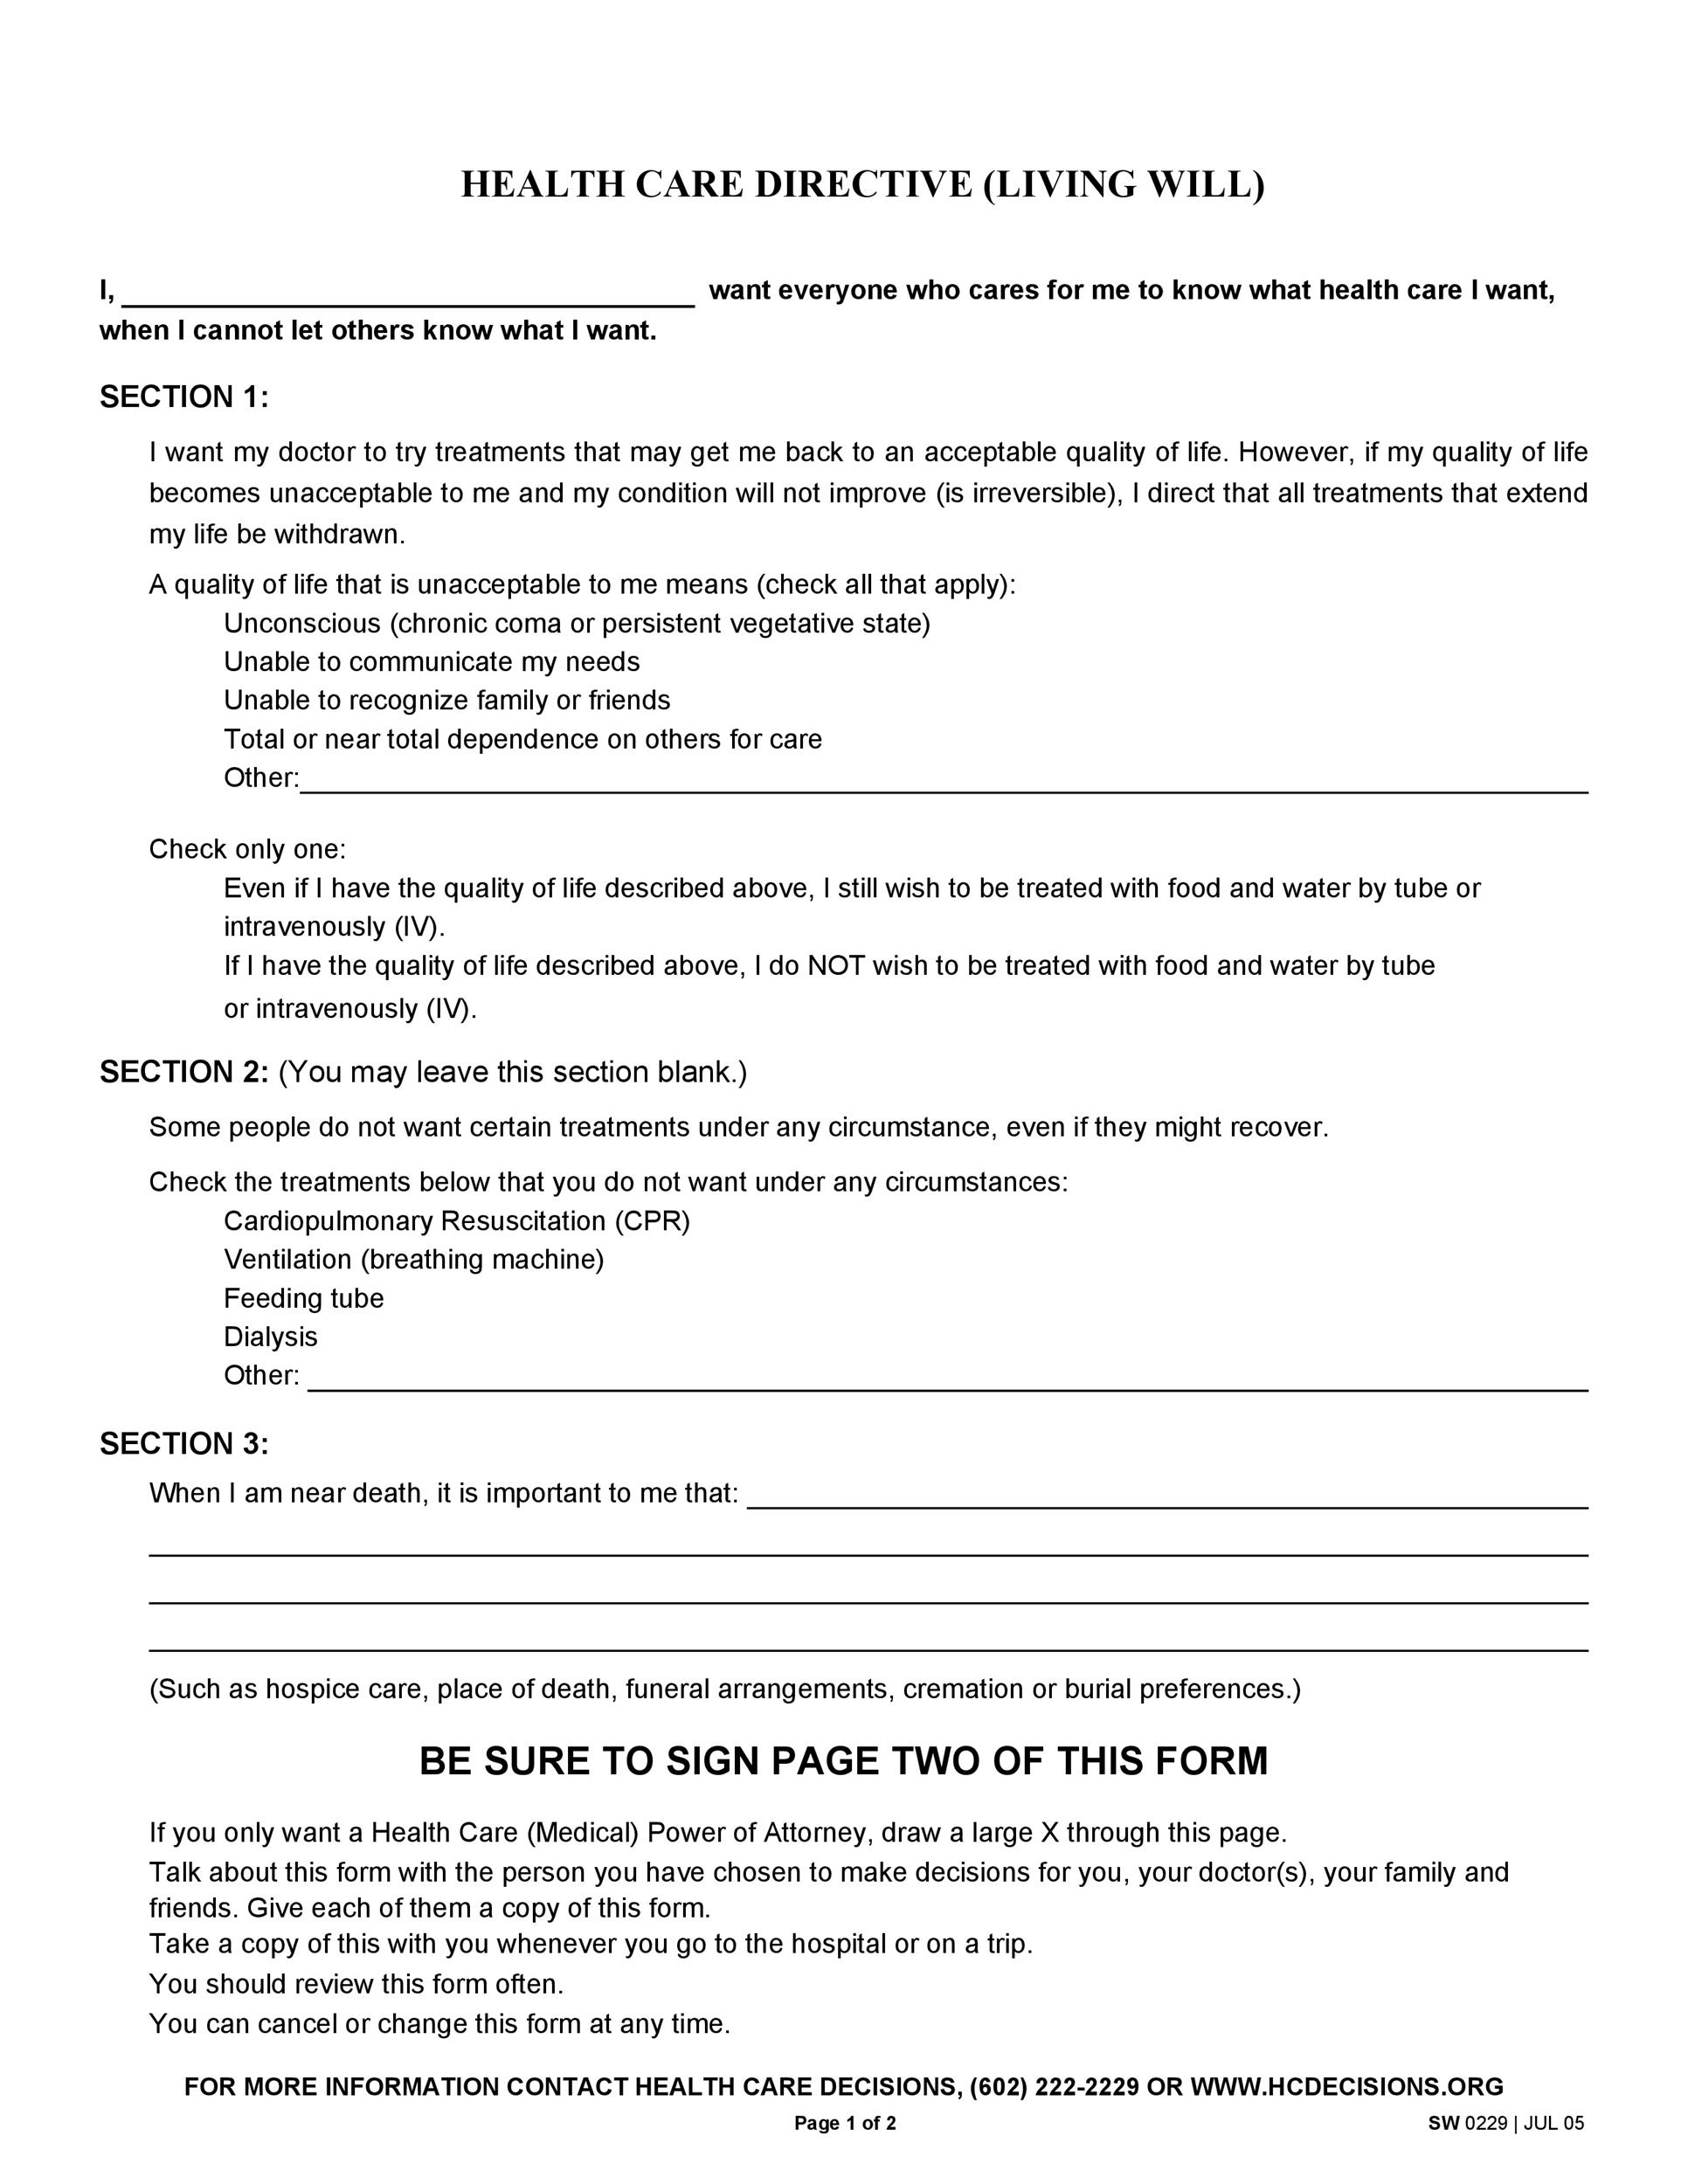 50 Free Living Will Templates Forms ALL STATES 